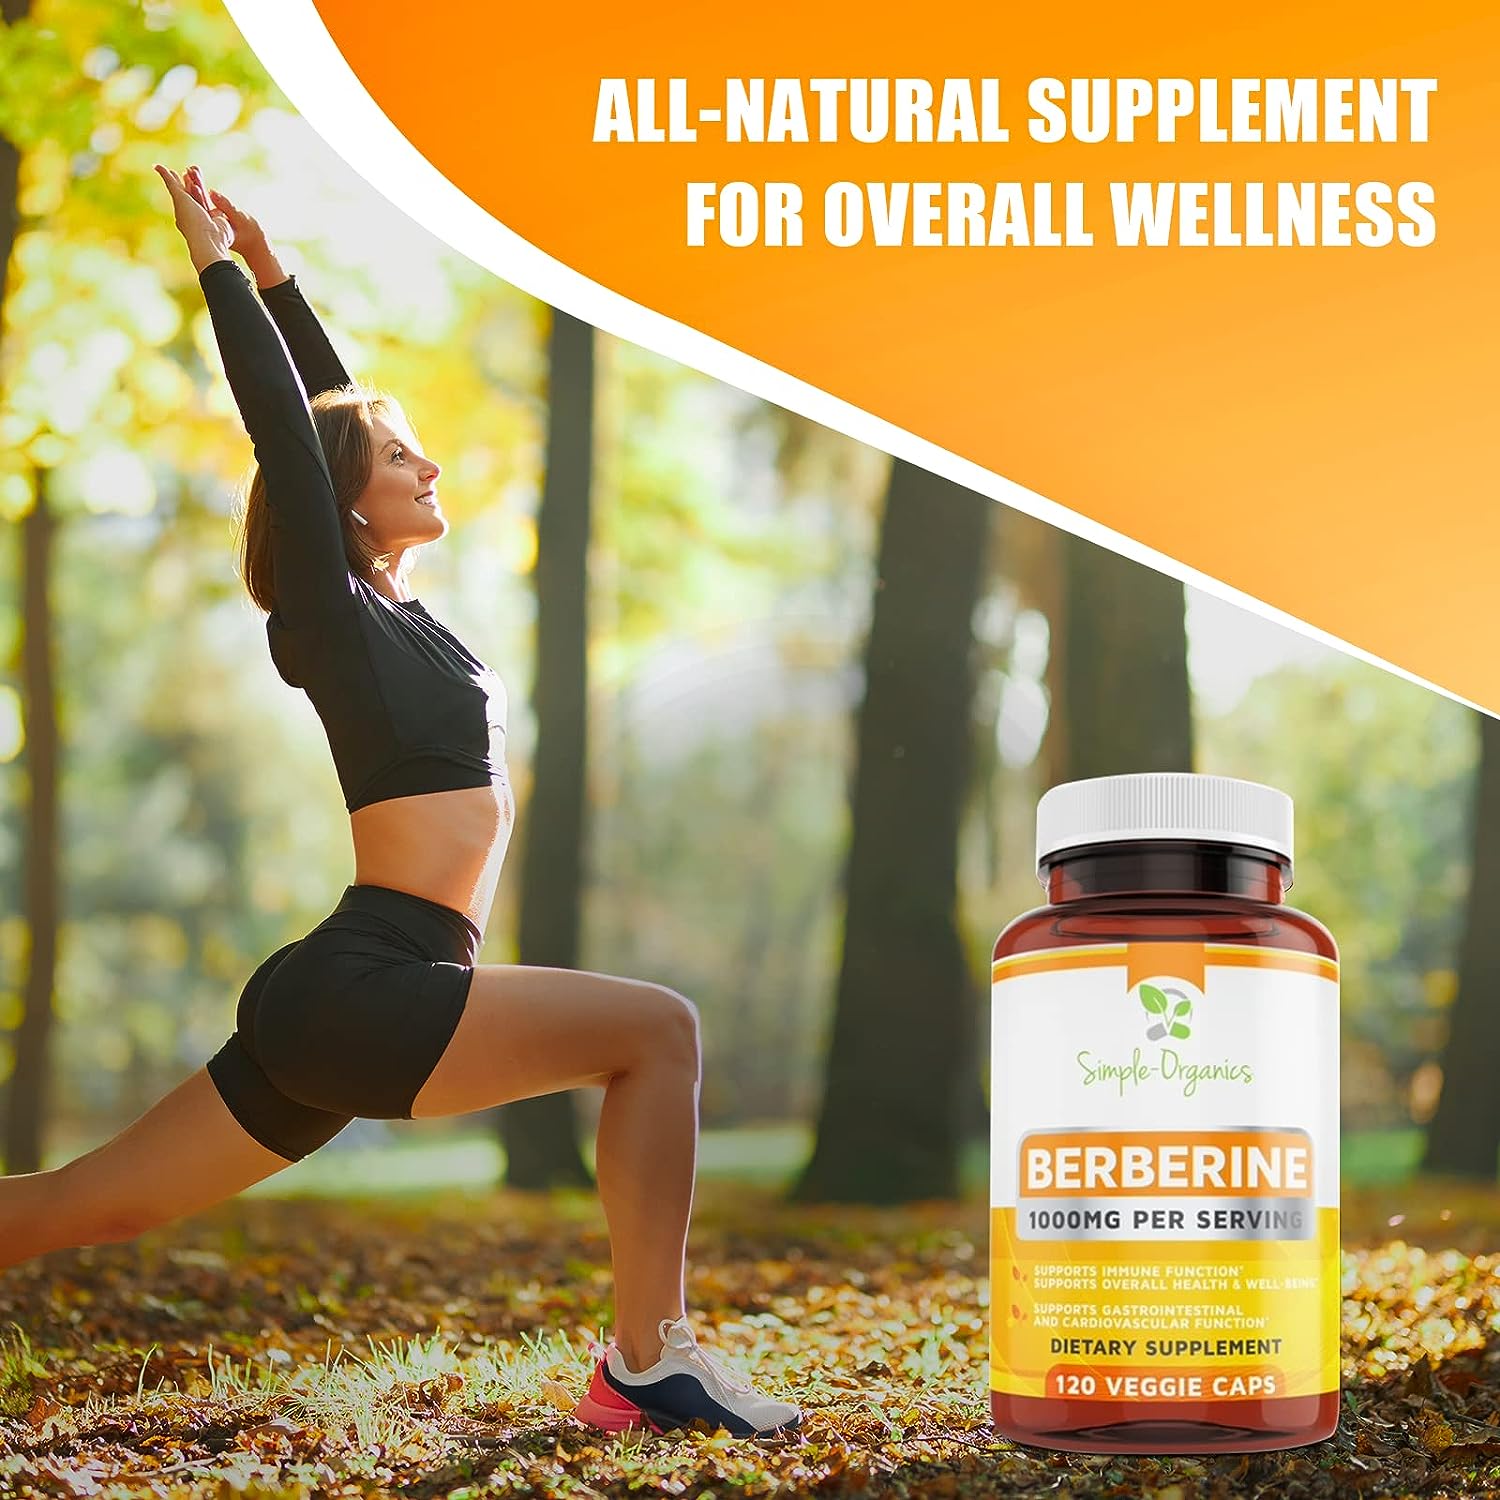 Simple-Organics Berberine 500mg (1000mg Per Serving) - 120 Capsules- Supports Healthy Immune Function, Gastrointestinal  Overall Wellness